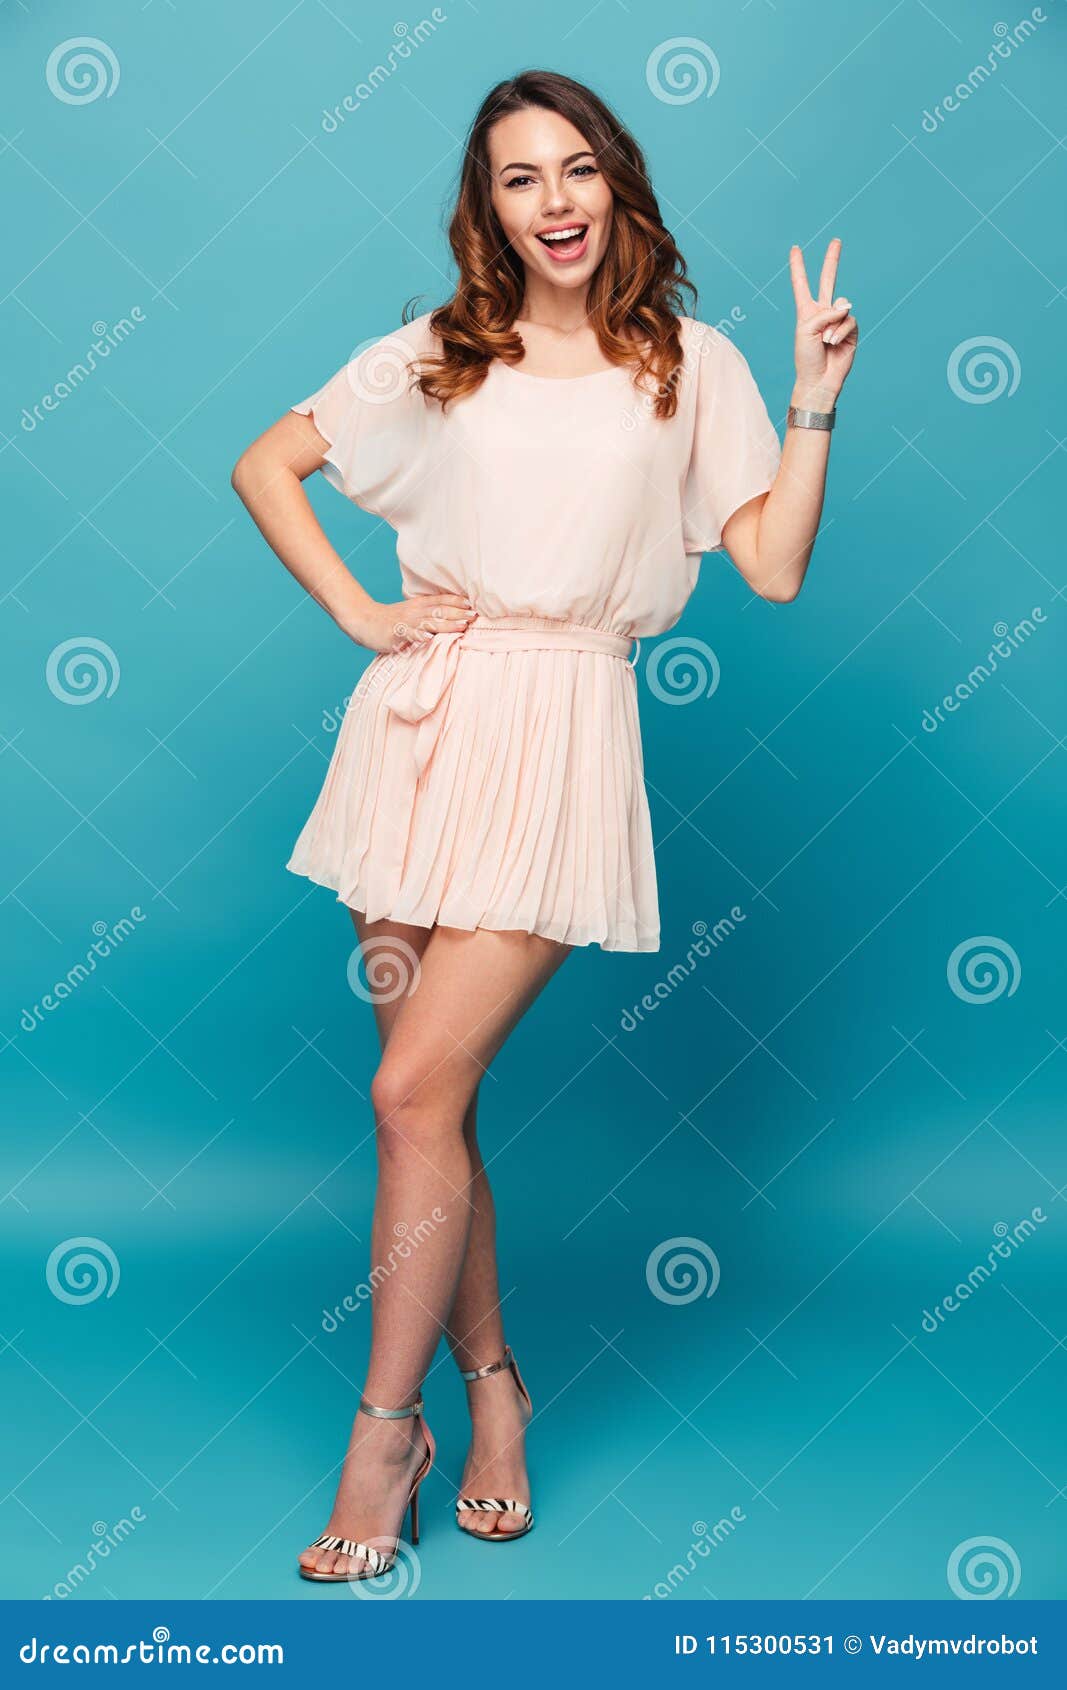 Full Length Portrait of a Cheerful Beautiful Girl Stock Image - Image ...